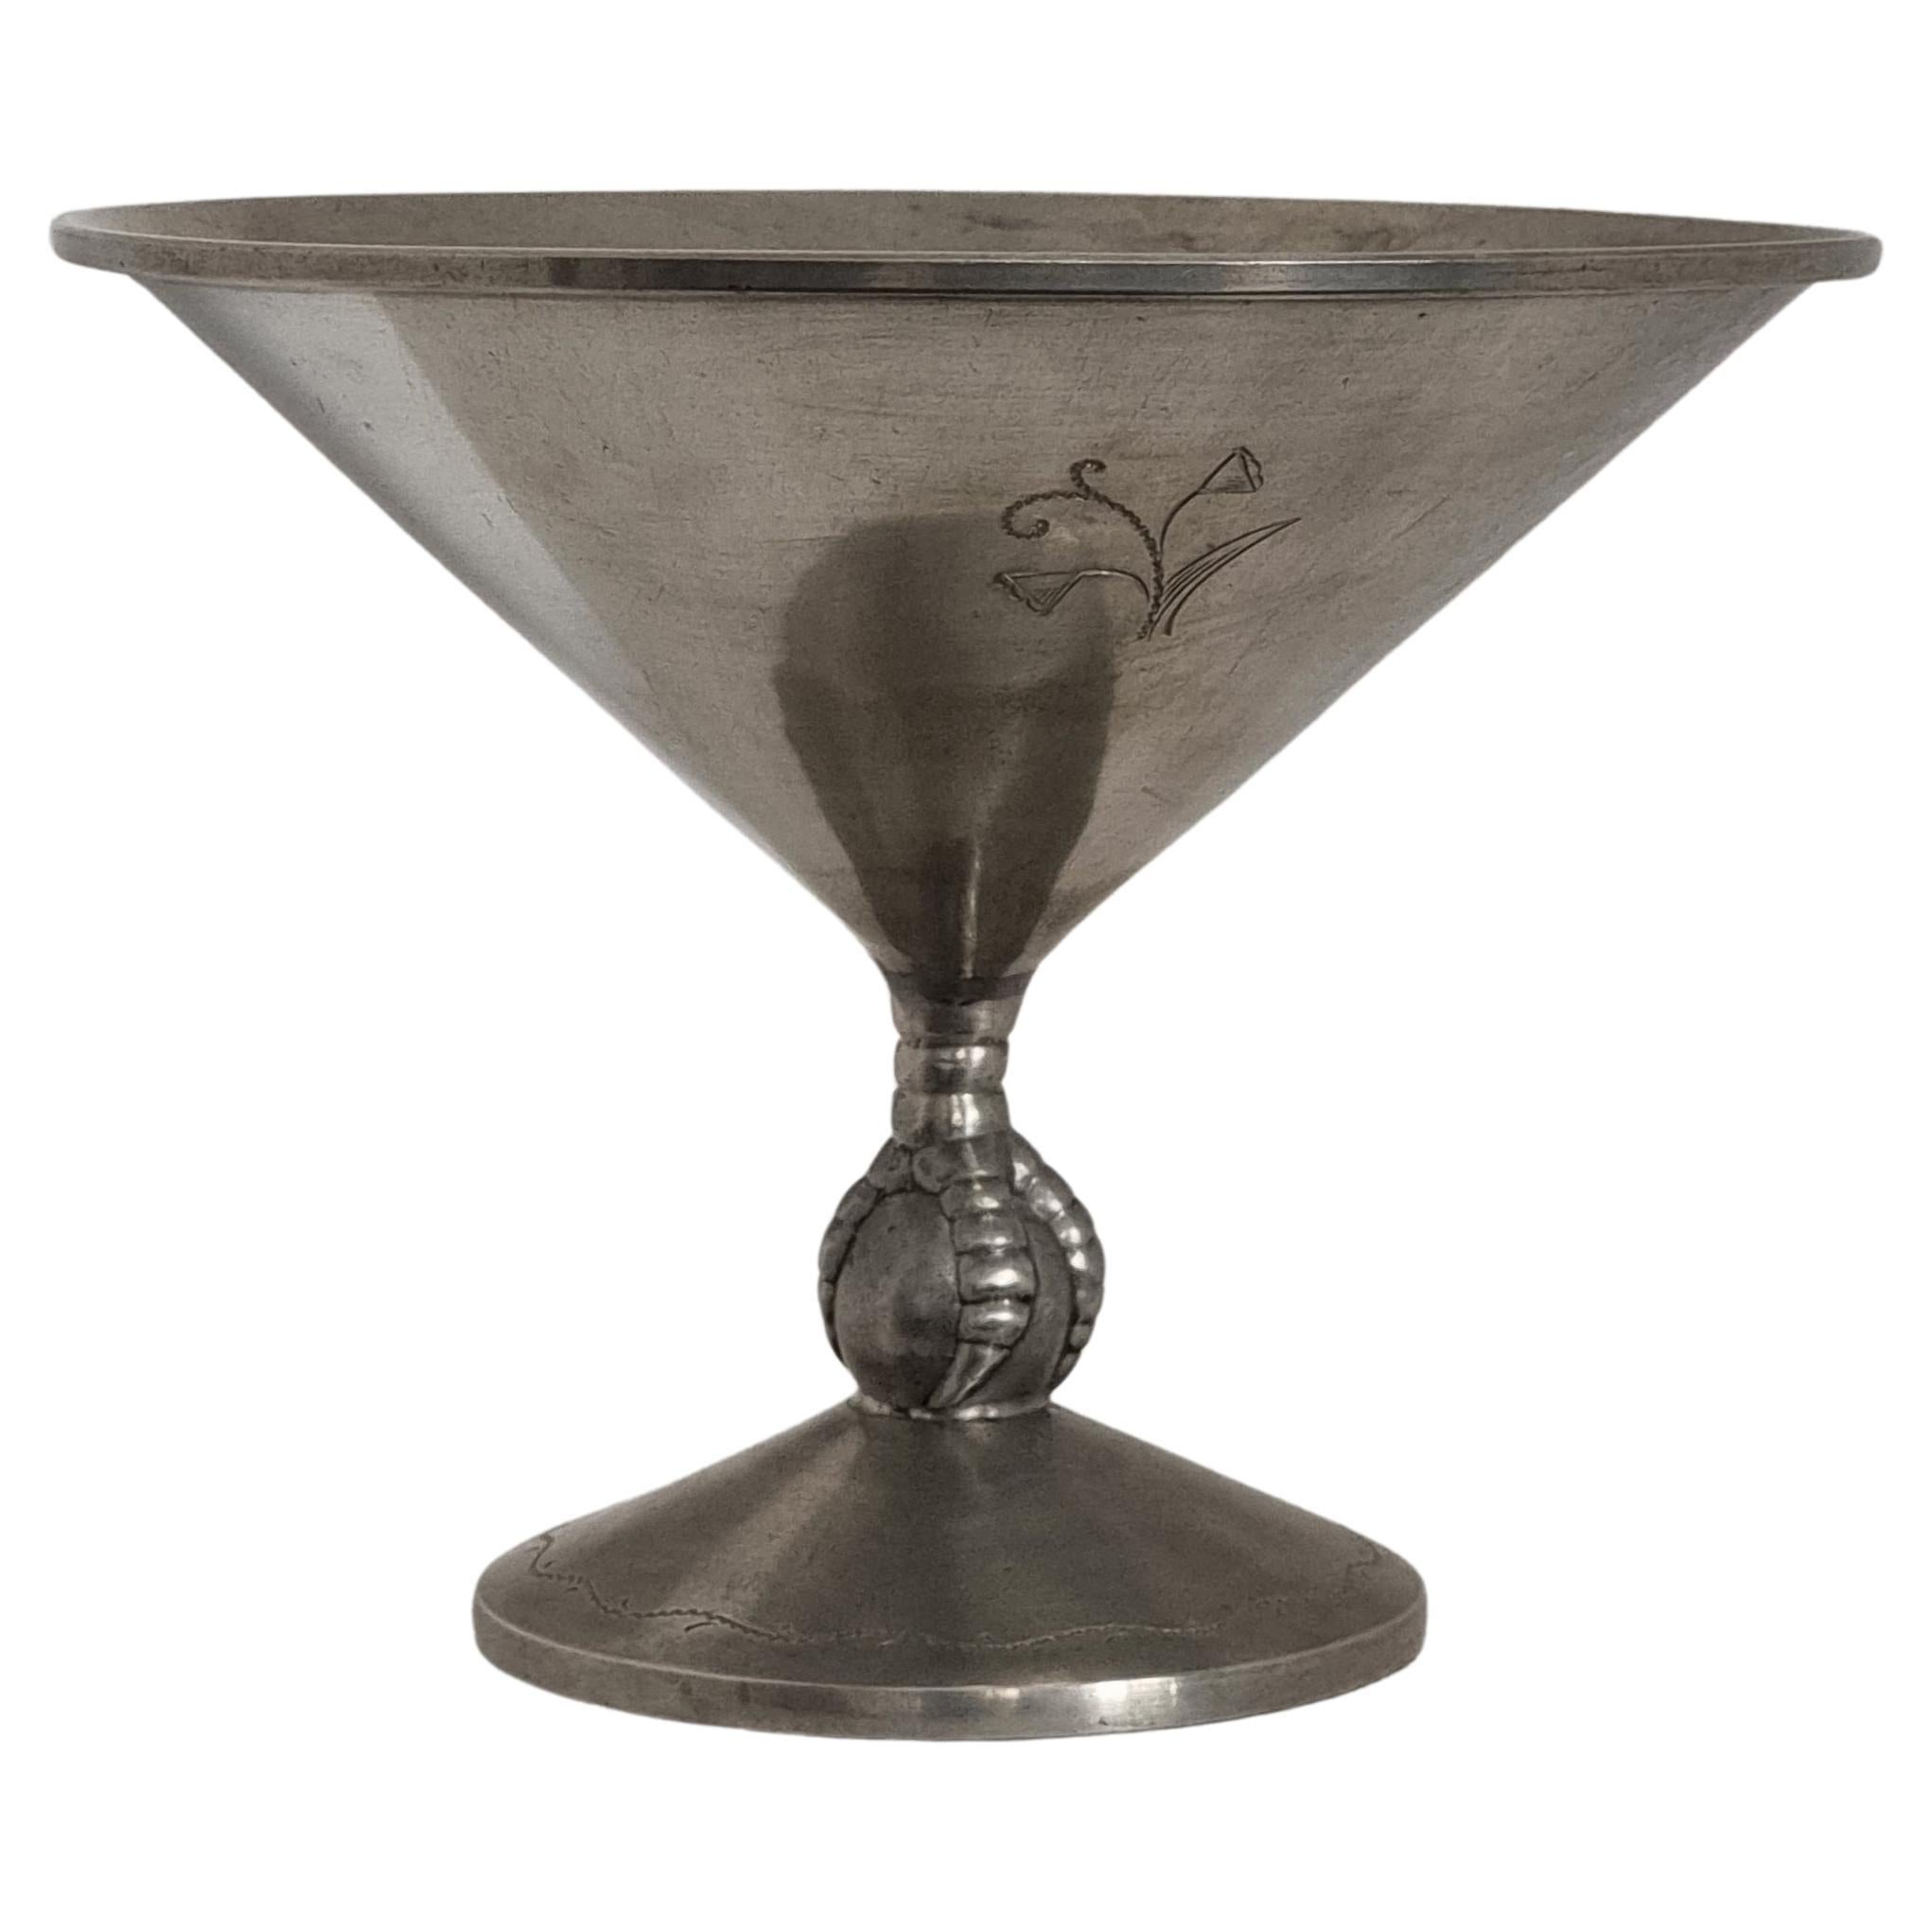 Decorative pewter bowl with engraved decor of stylized flowers, petals, and with ball & claw. 

Hallmark: KE & Co =  Knut Eriksson & Co. D8=1930.

Made in Eskilstuna, Sweden. The company was founded in 1906 and closed in 1968.

In beautiful patina,